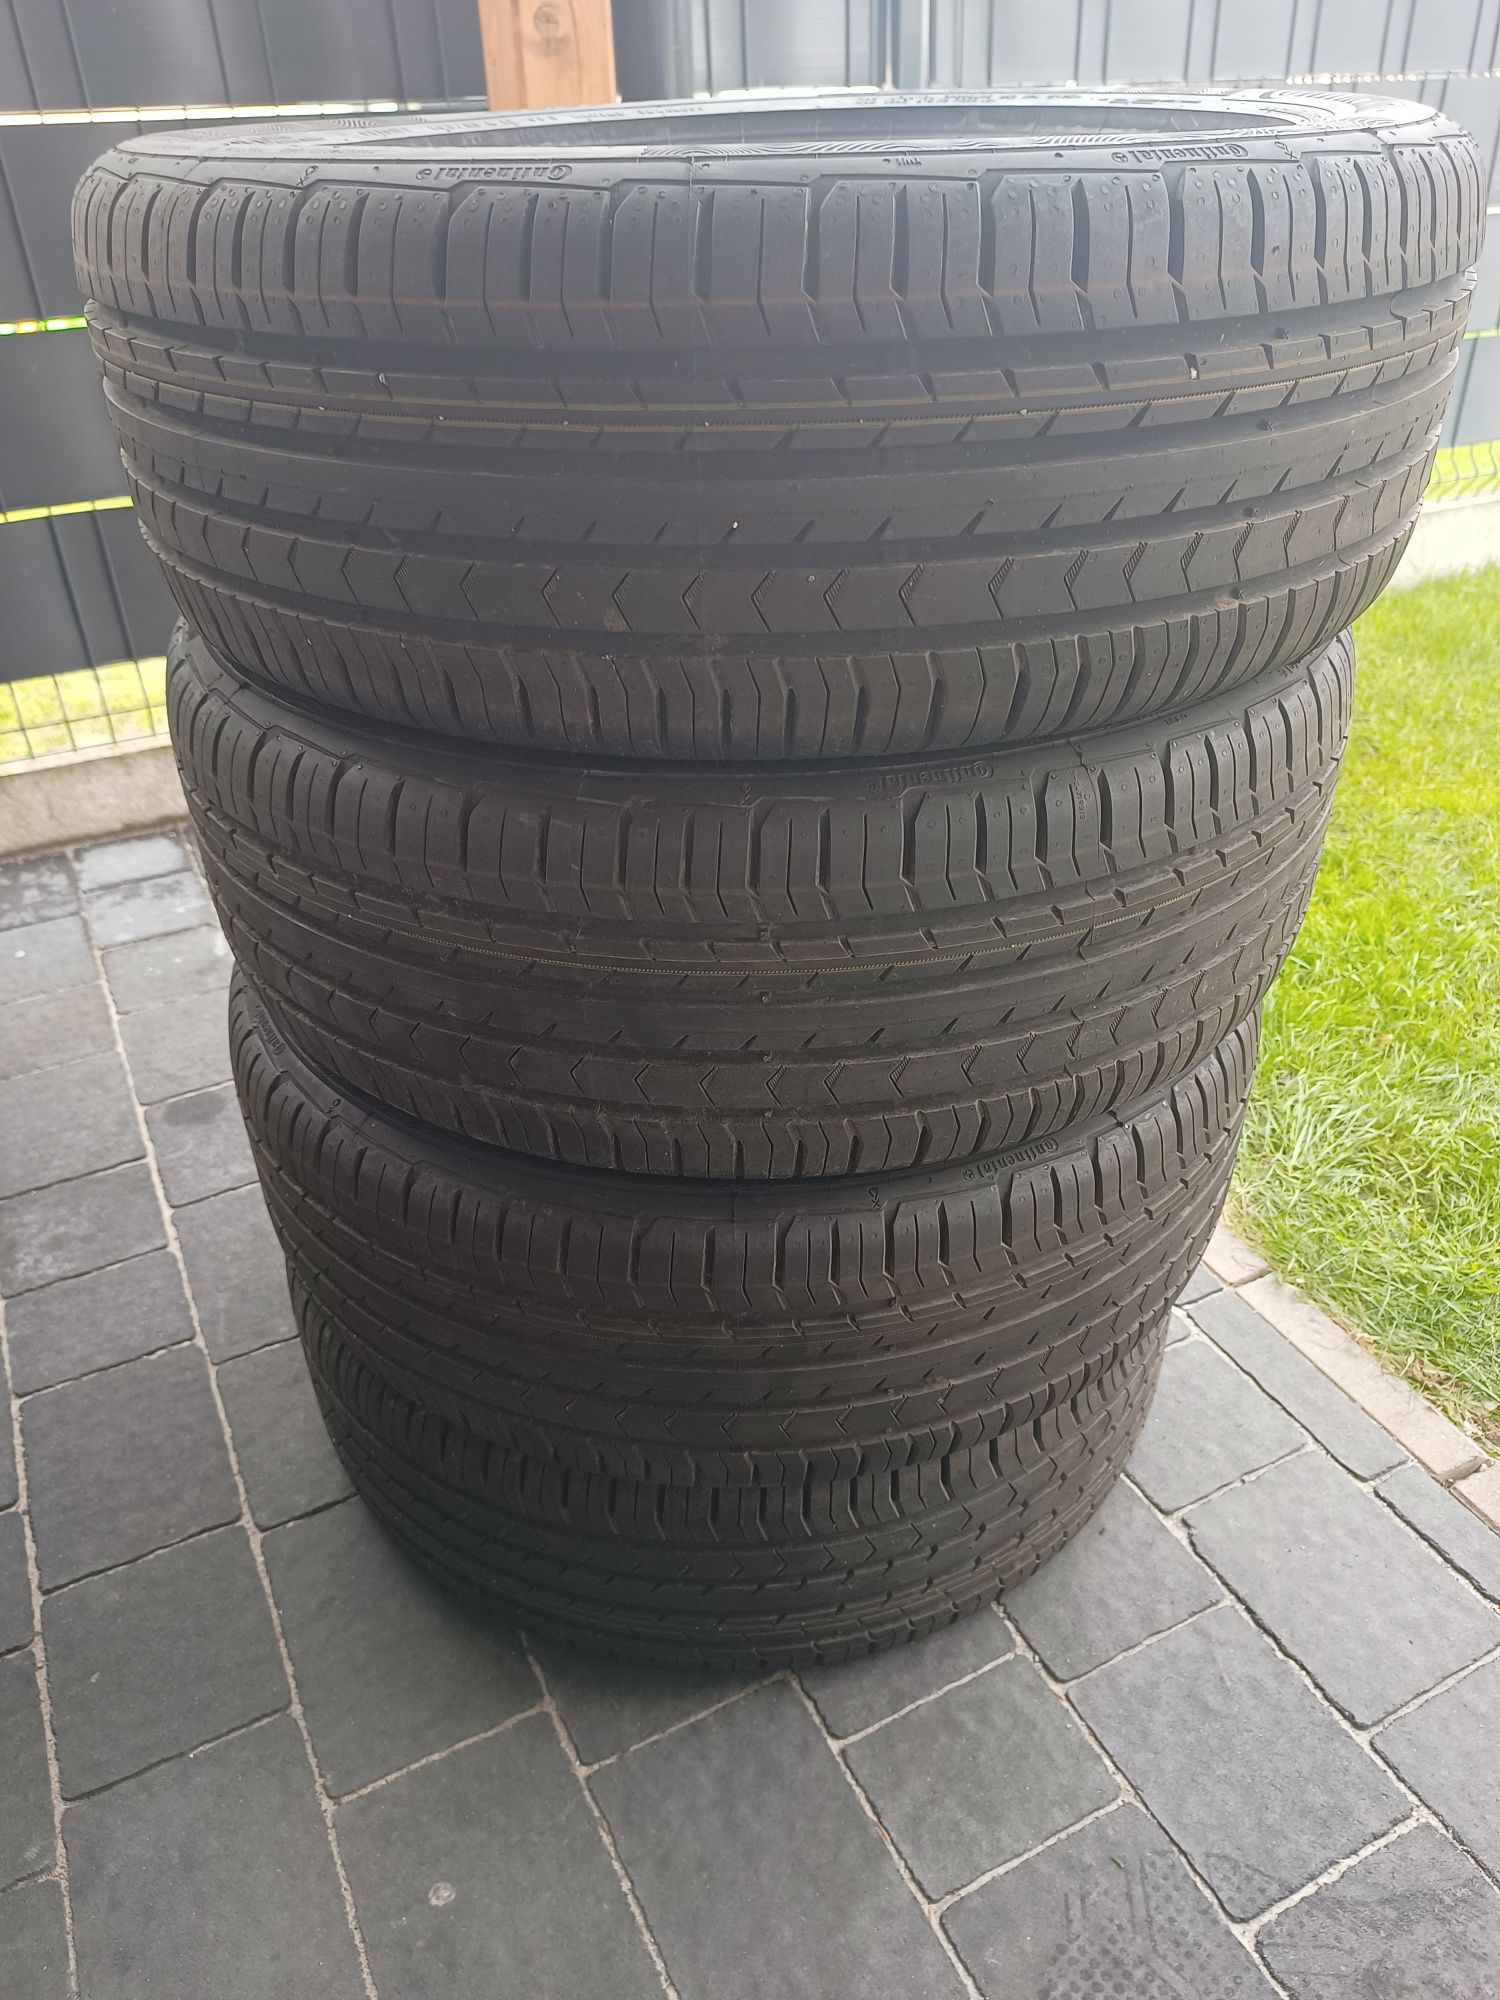 Opony Continental ContiPremiumContact 5 205/55 R17 91V